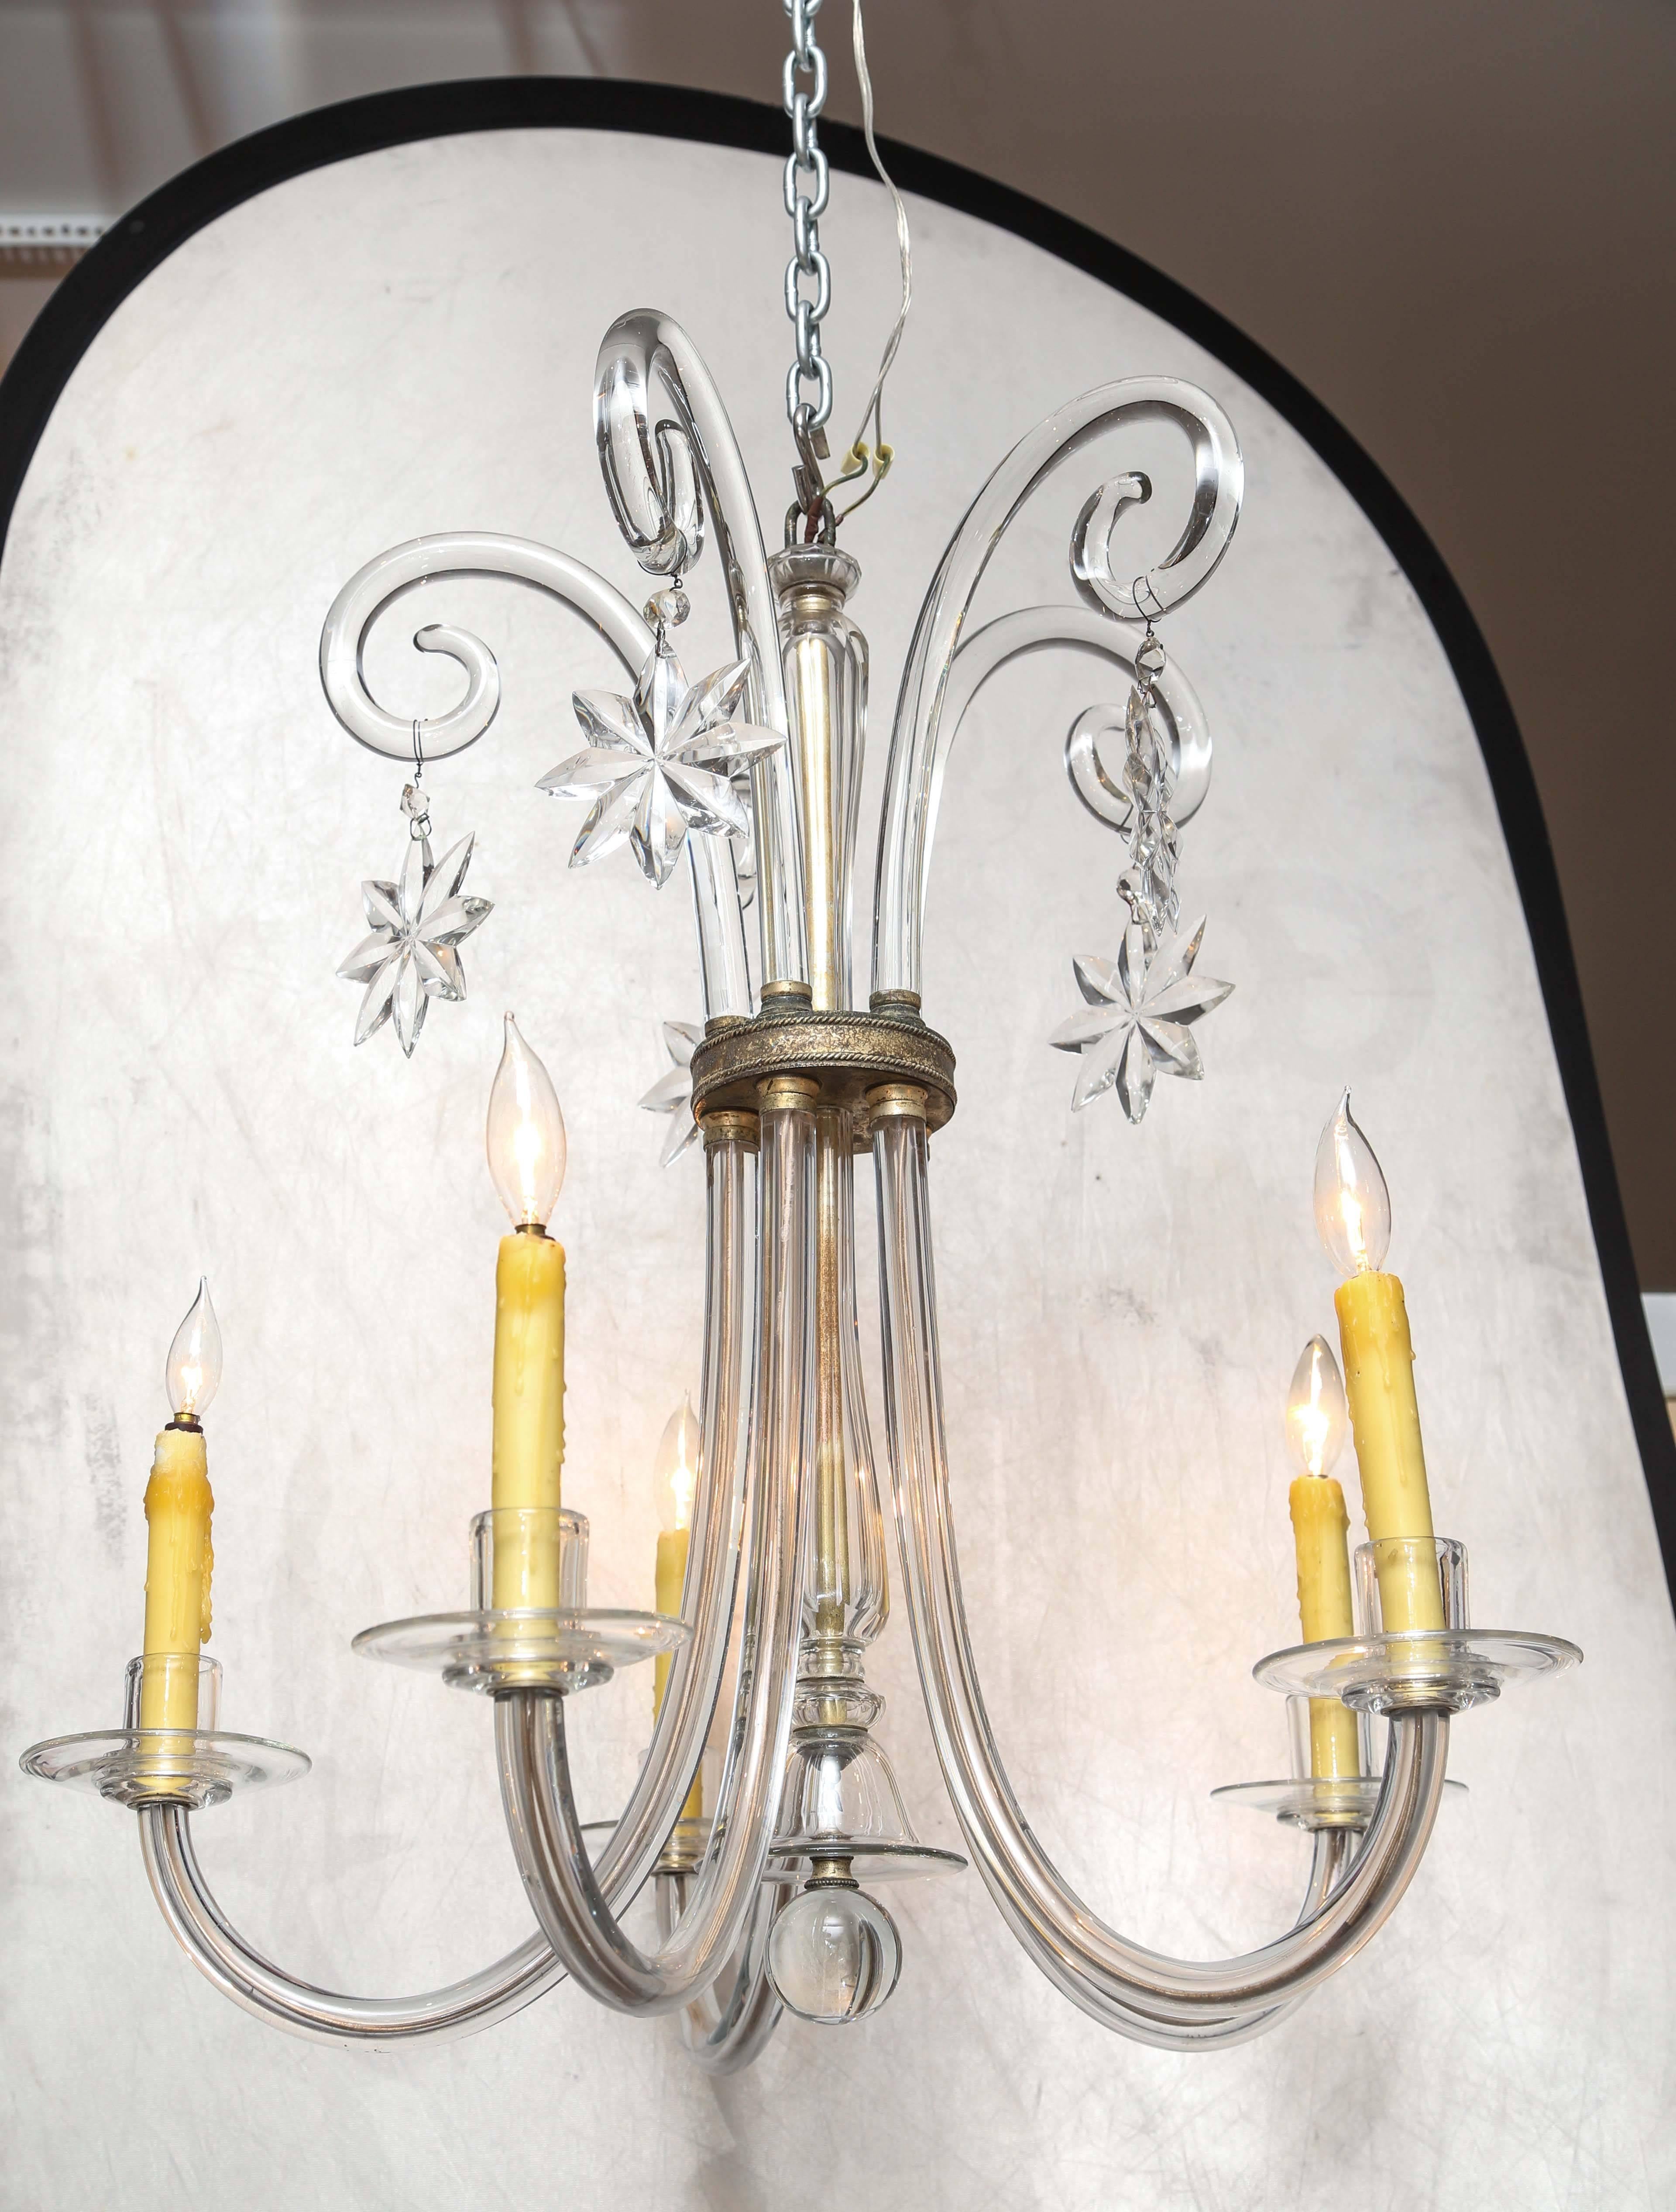 Dramatic Art Deco glass five-arm chandelier with large star drops.